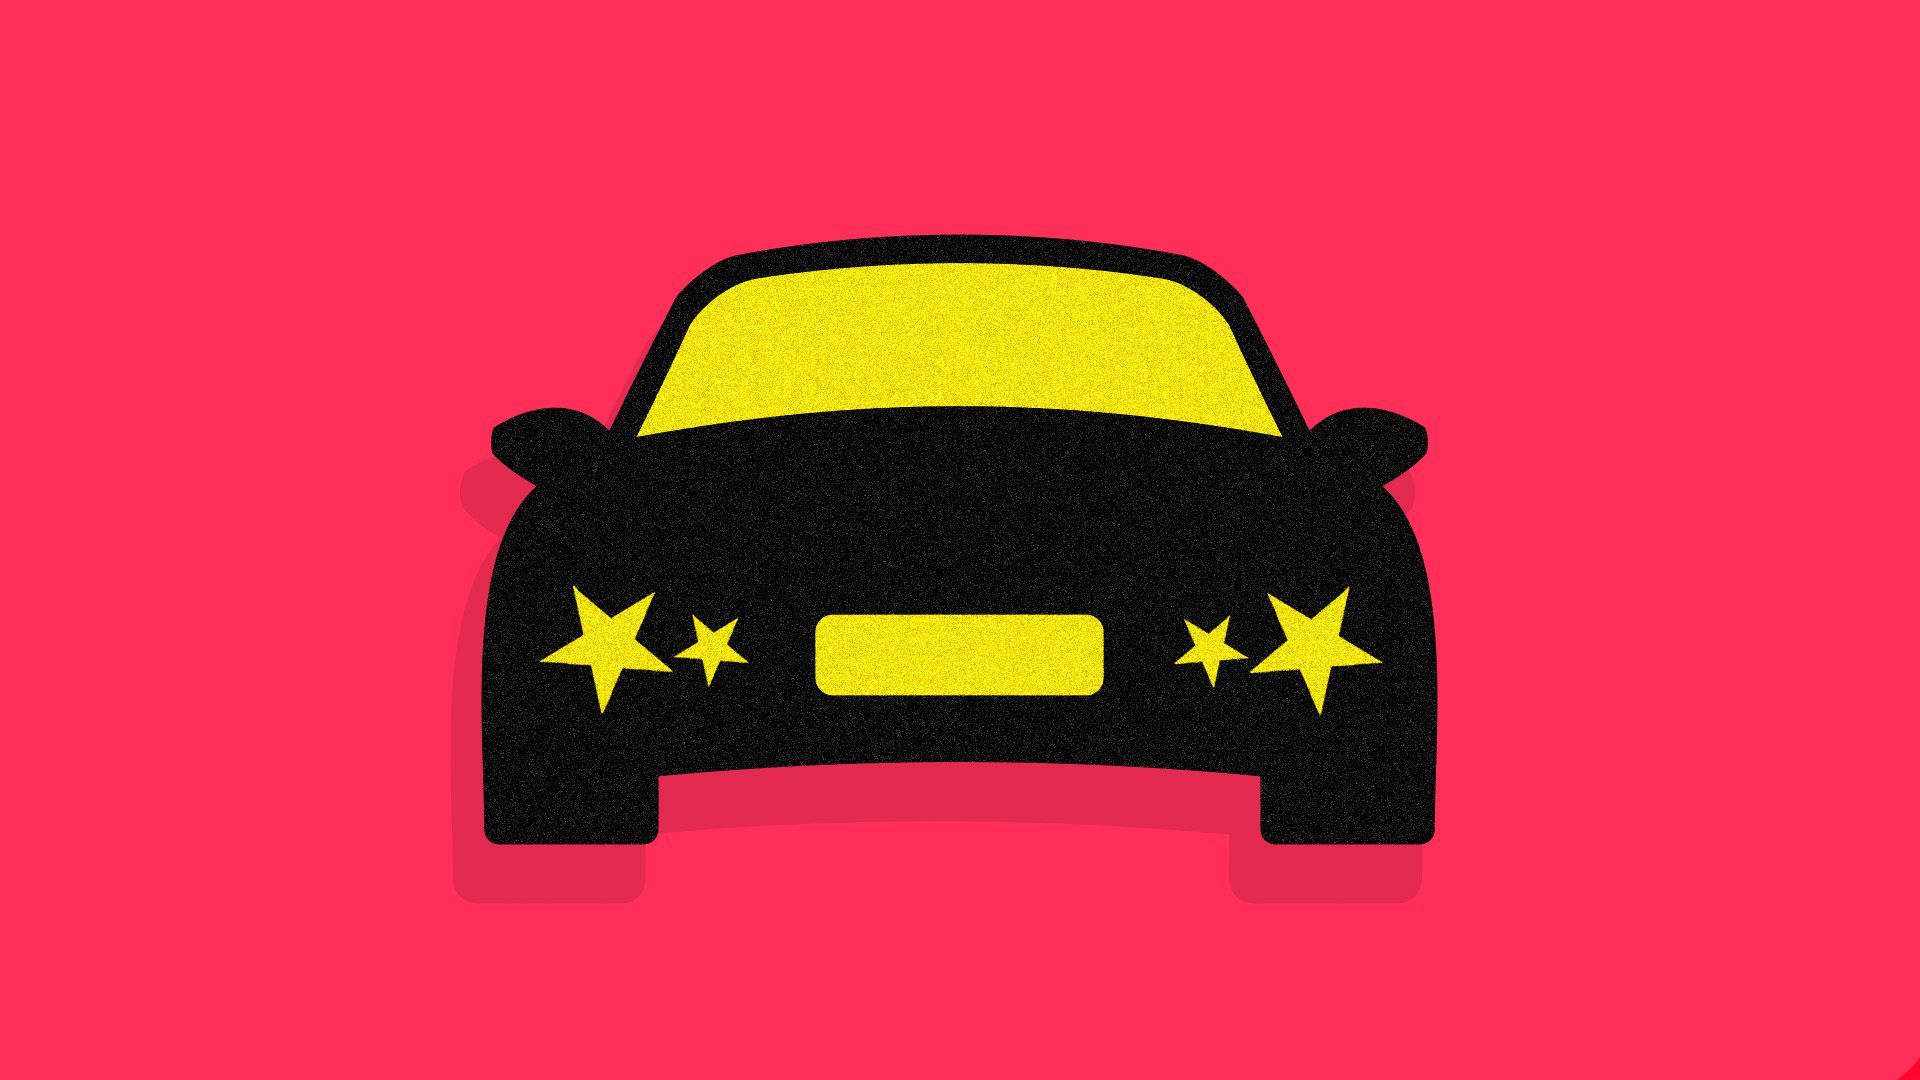 Illo of a car with stars as its headlights and a red background representing China